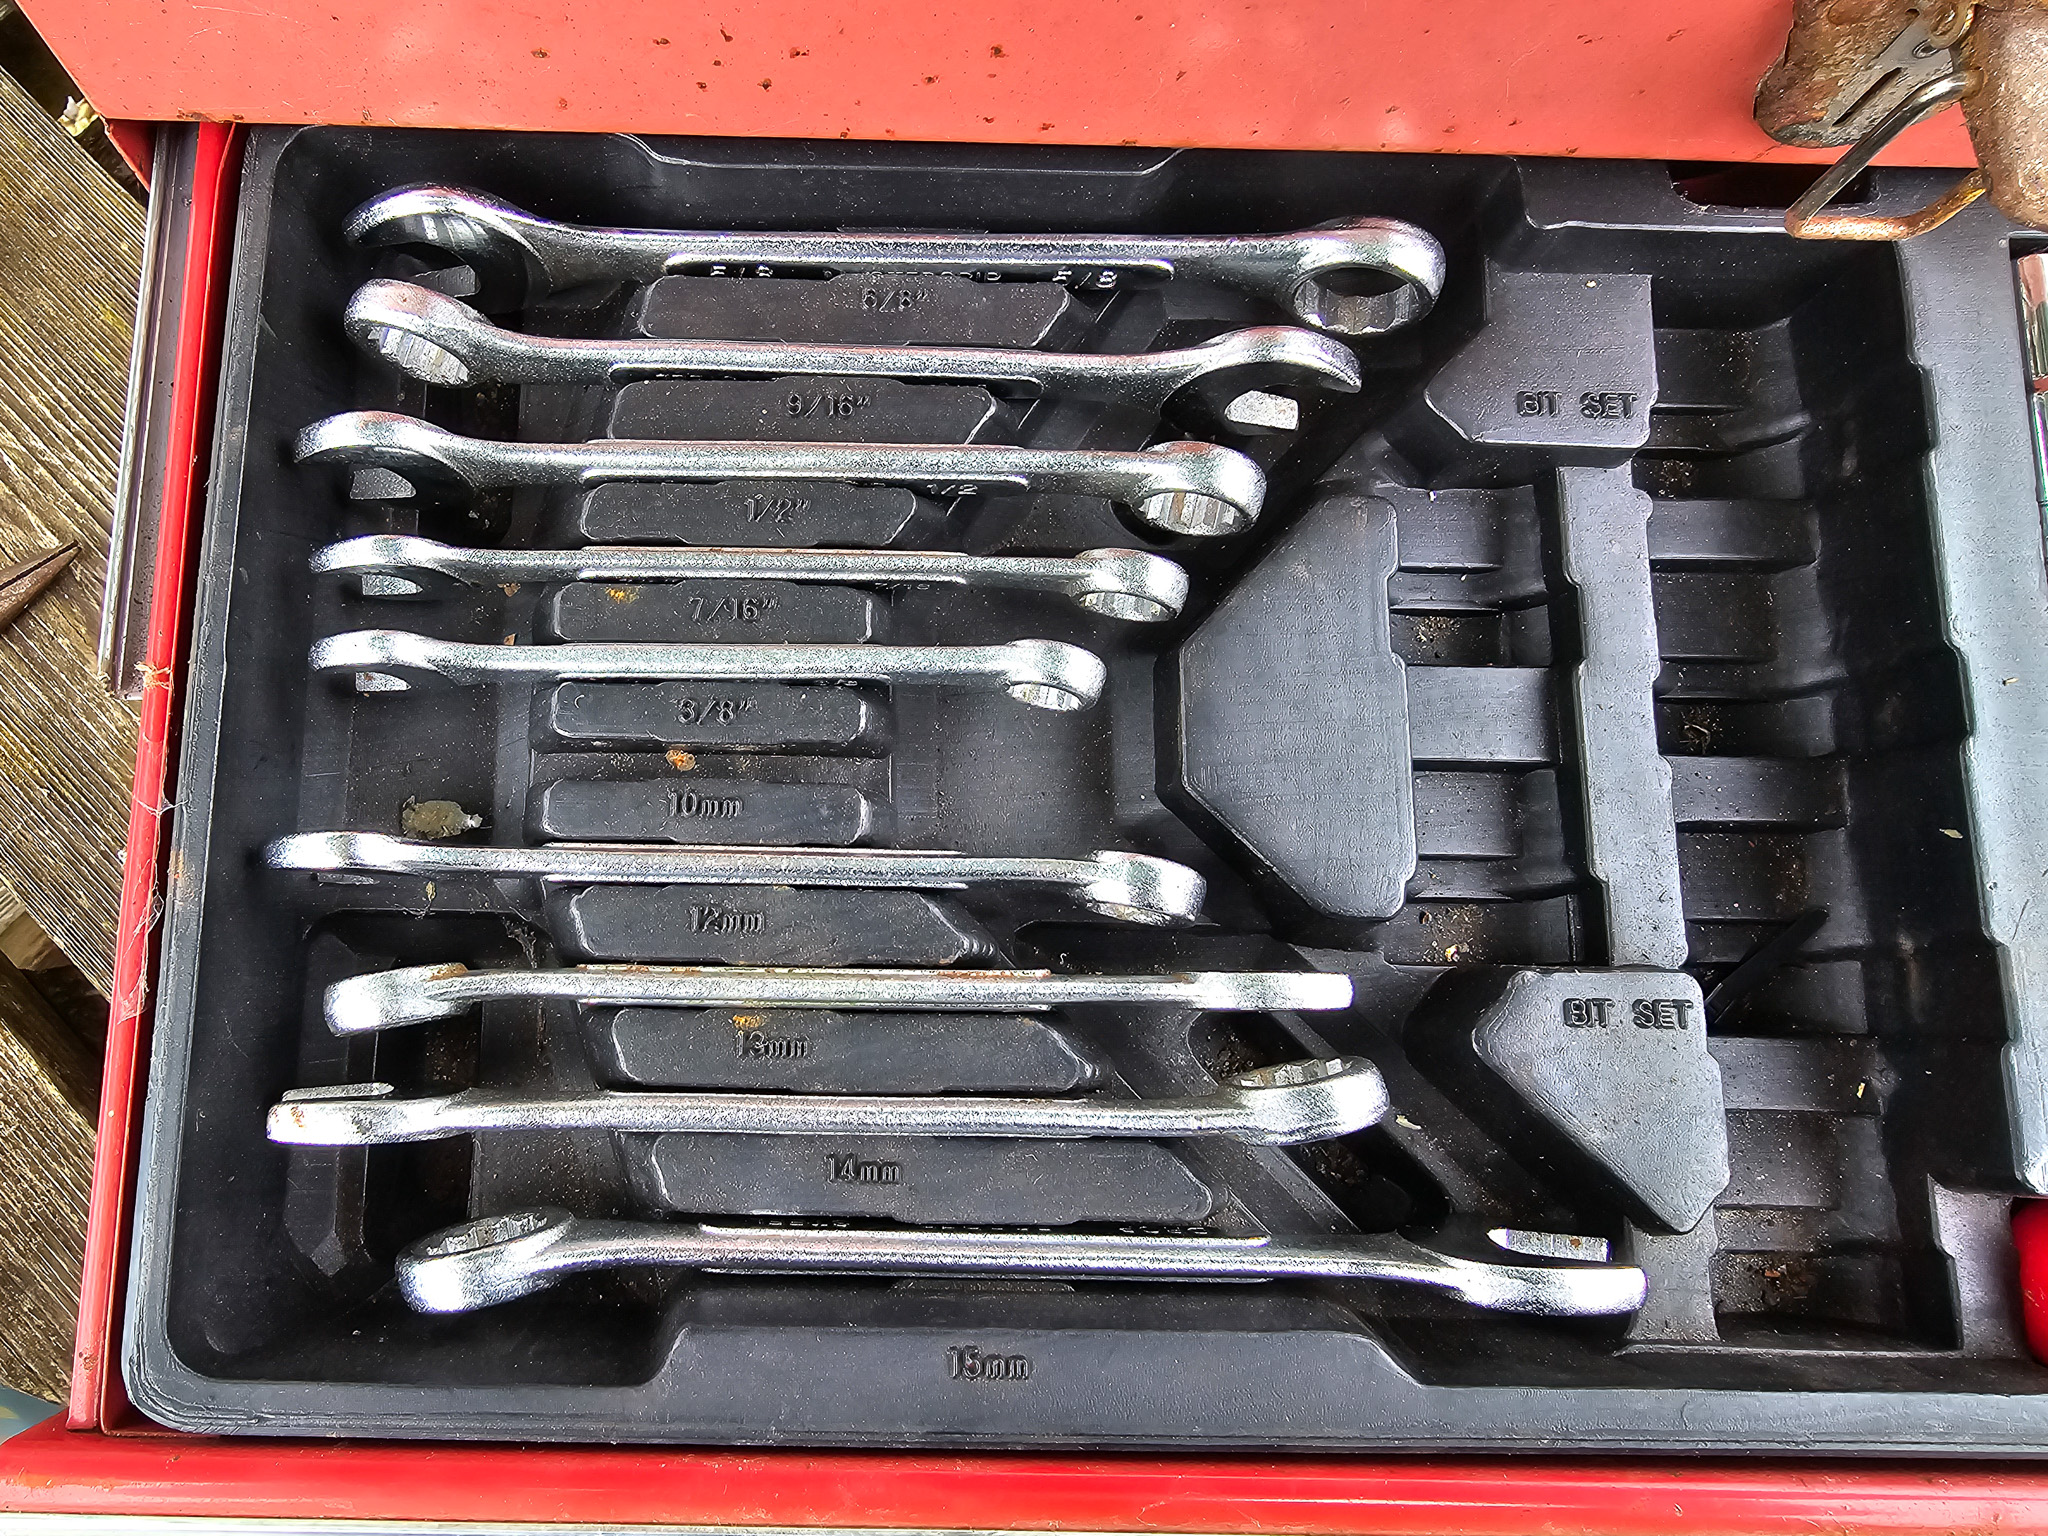 Master Grip Comprehensive Socket set with 1/4" 3/8" 1/2" Ratchets and sockets 1 socket and one - Image 4 of 6